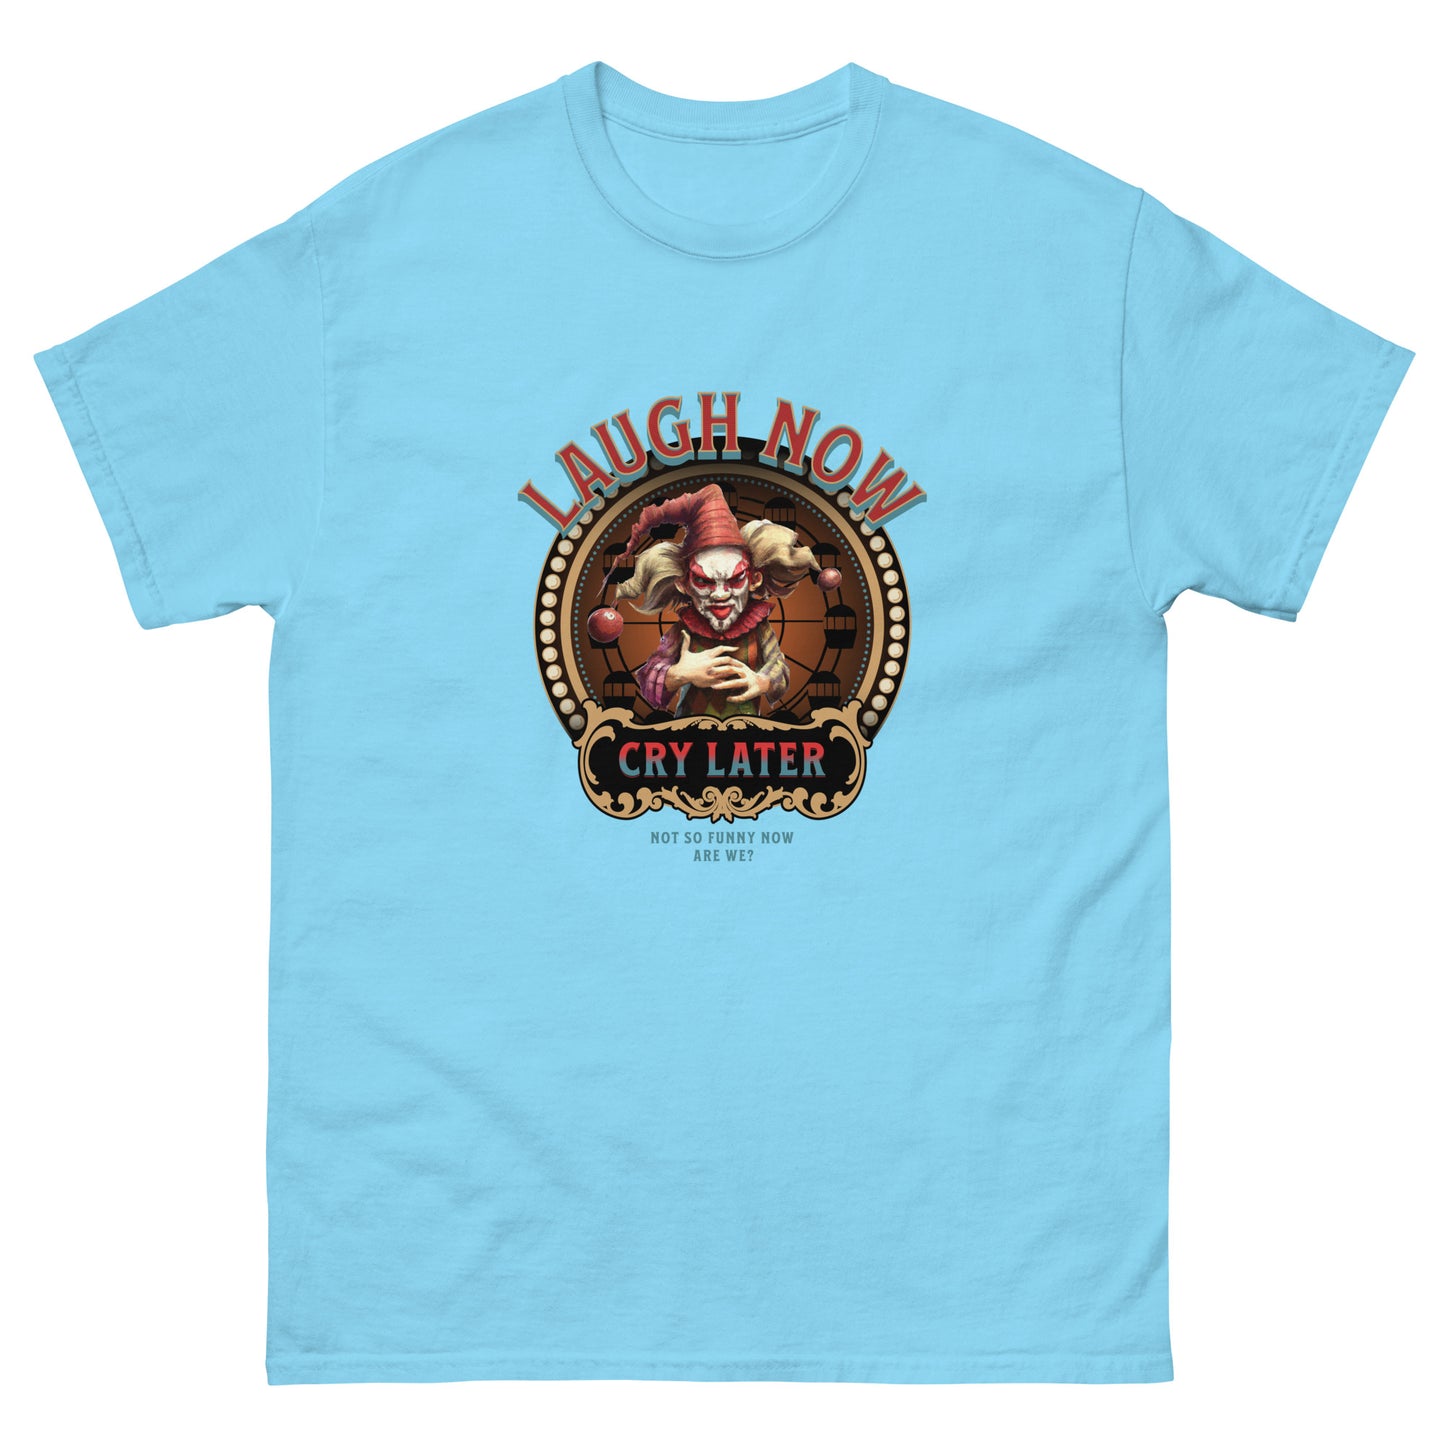 Circus of Emotions Tee